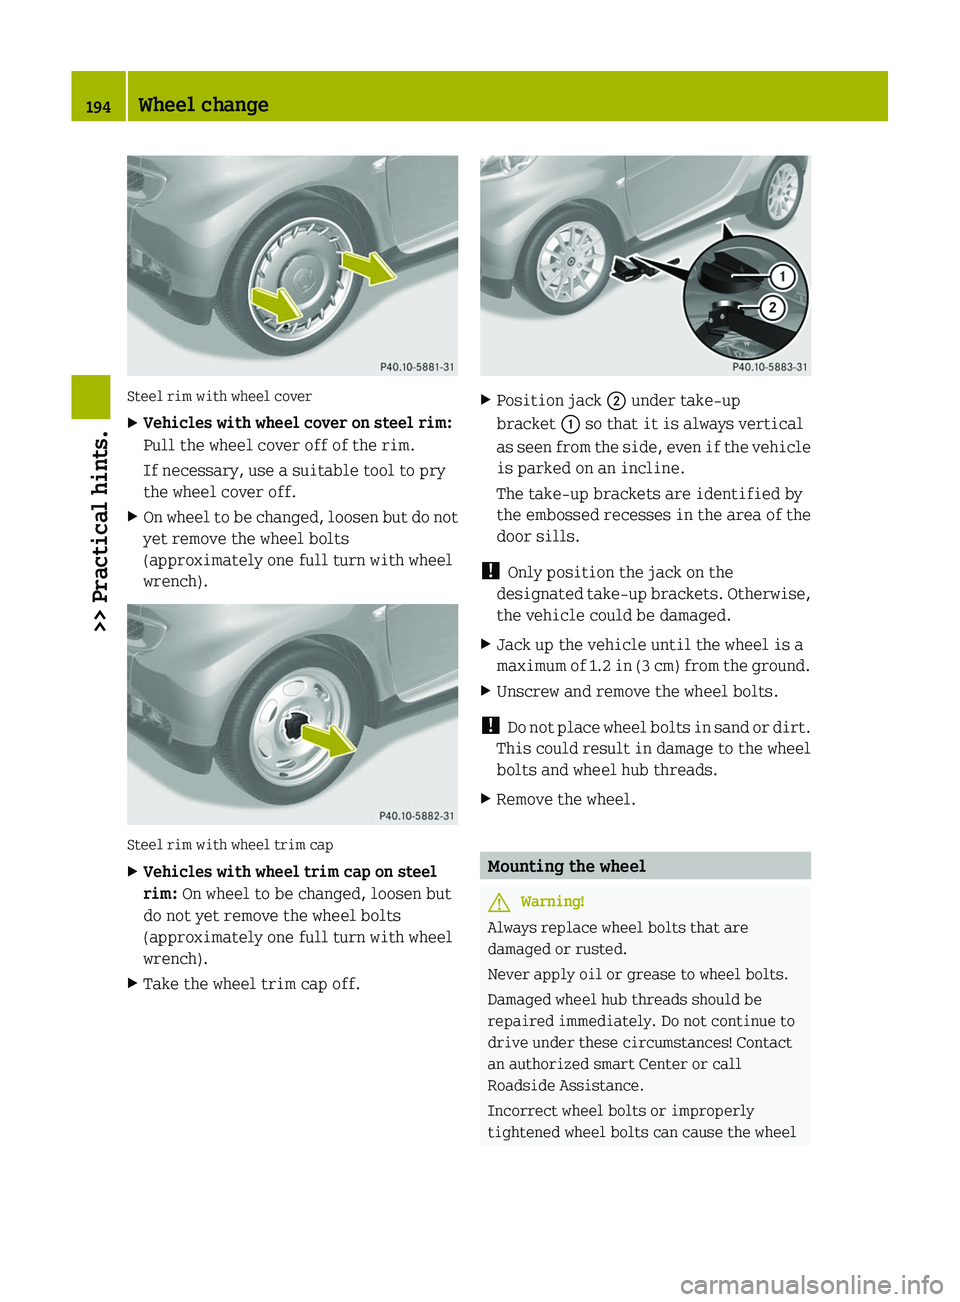 SMART FORTWO COUPE 2011 User Guide Steel rim with wheel cover
XVehicles with wheel cover on steel rim:
Pull the wheel cover off of the rim.
If necessary, use a suitable tool to pry
the wheel cover off.
XOn wheel to be changed, loosen b